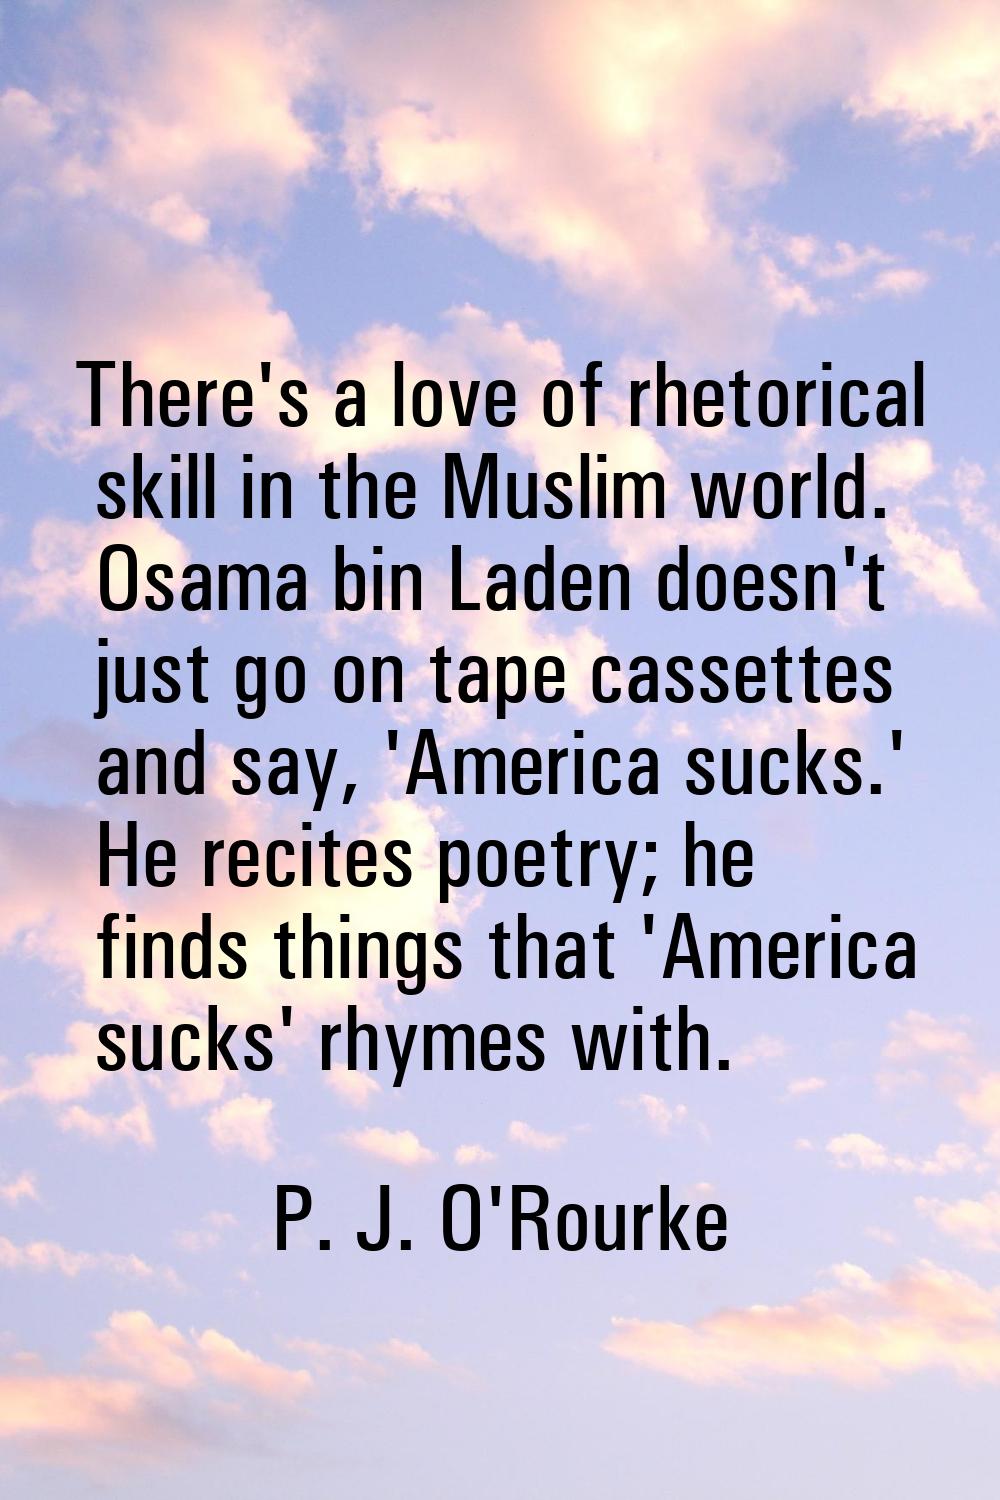 There's a love of rhetorical skill in the Muslim world. Osama bin Laden doesn't just go on tape cas